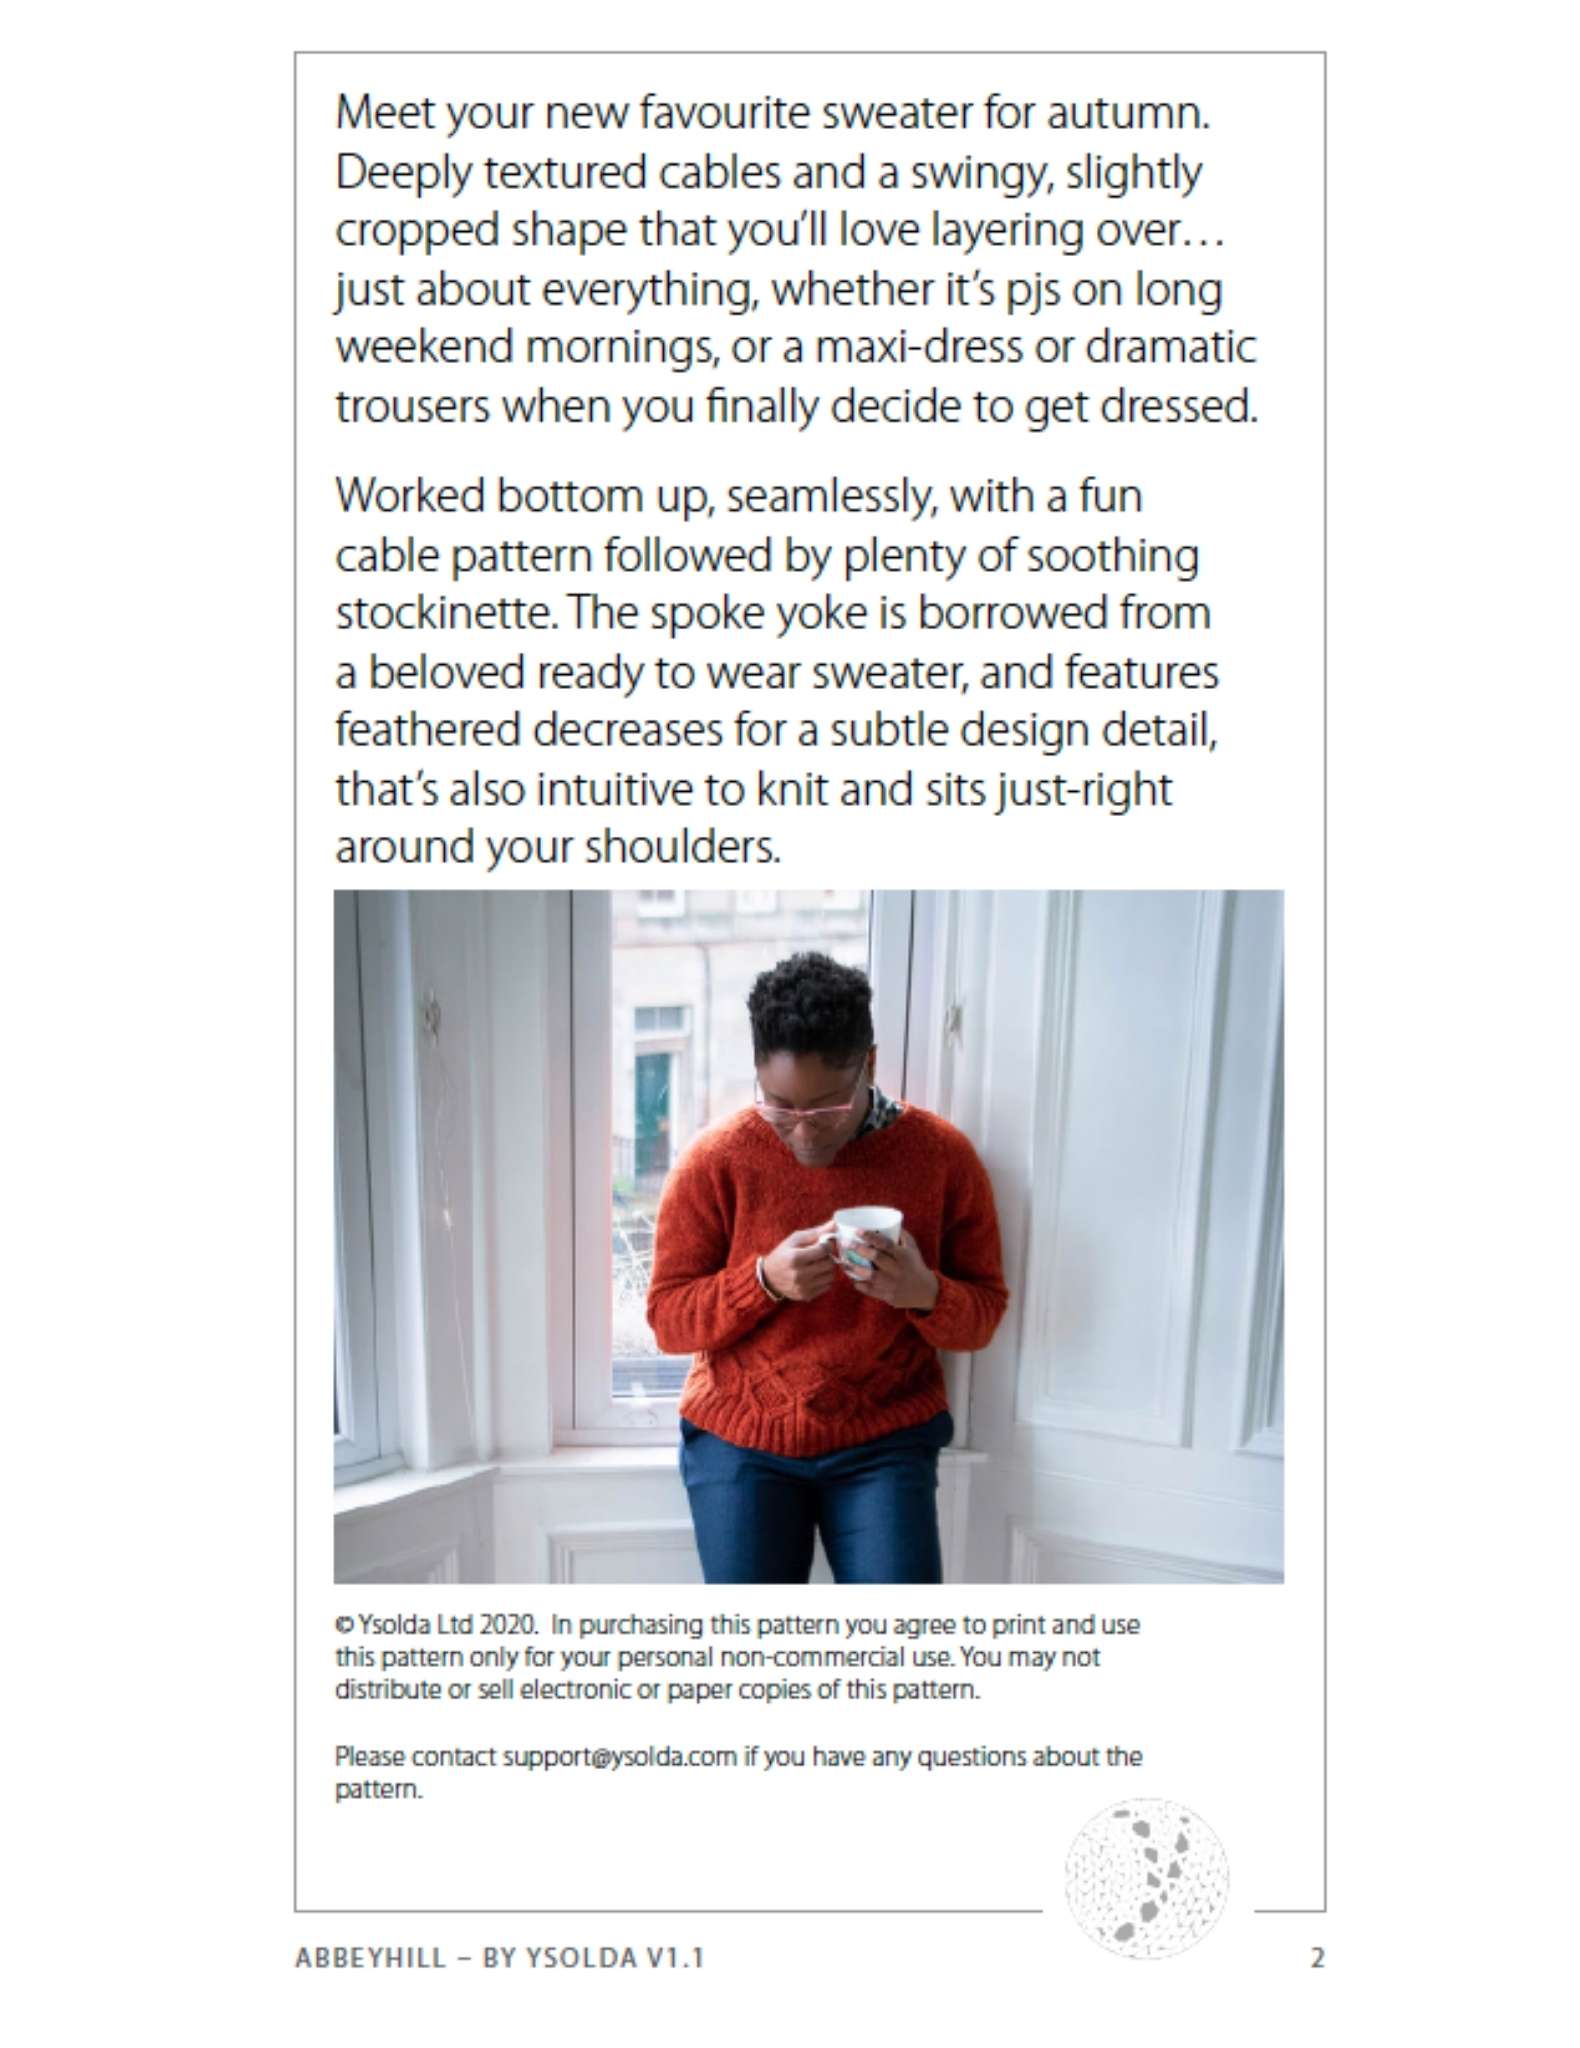 example of a mobile layout of a knitting pattern page with large black text at the top and an image of a black woman wearing an orange sweater underneath